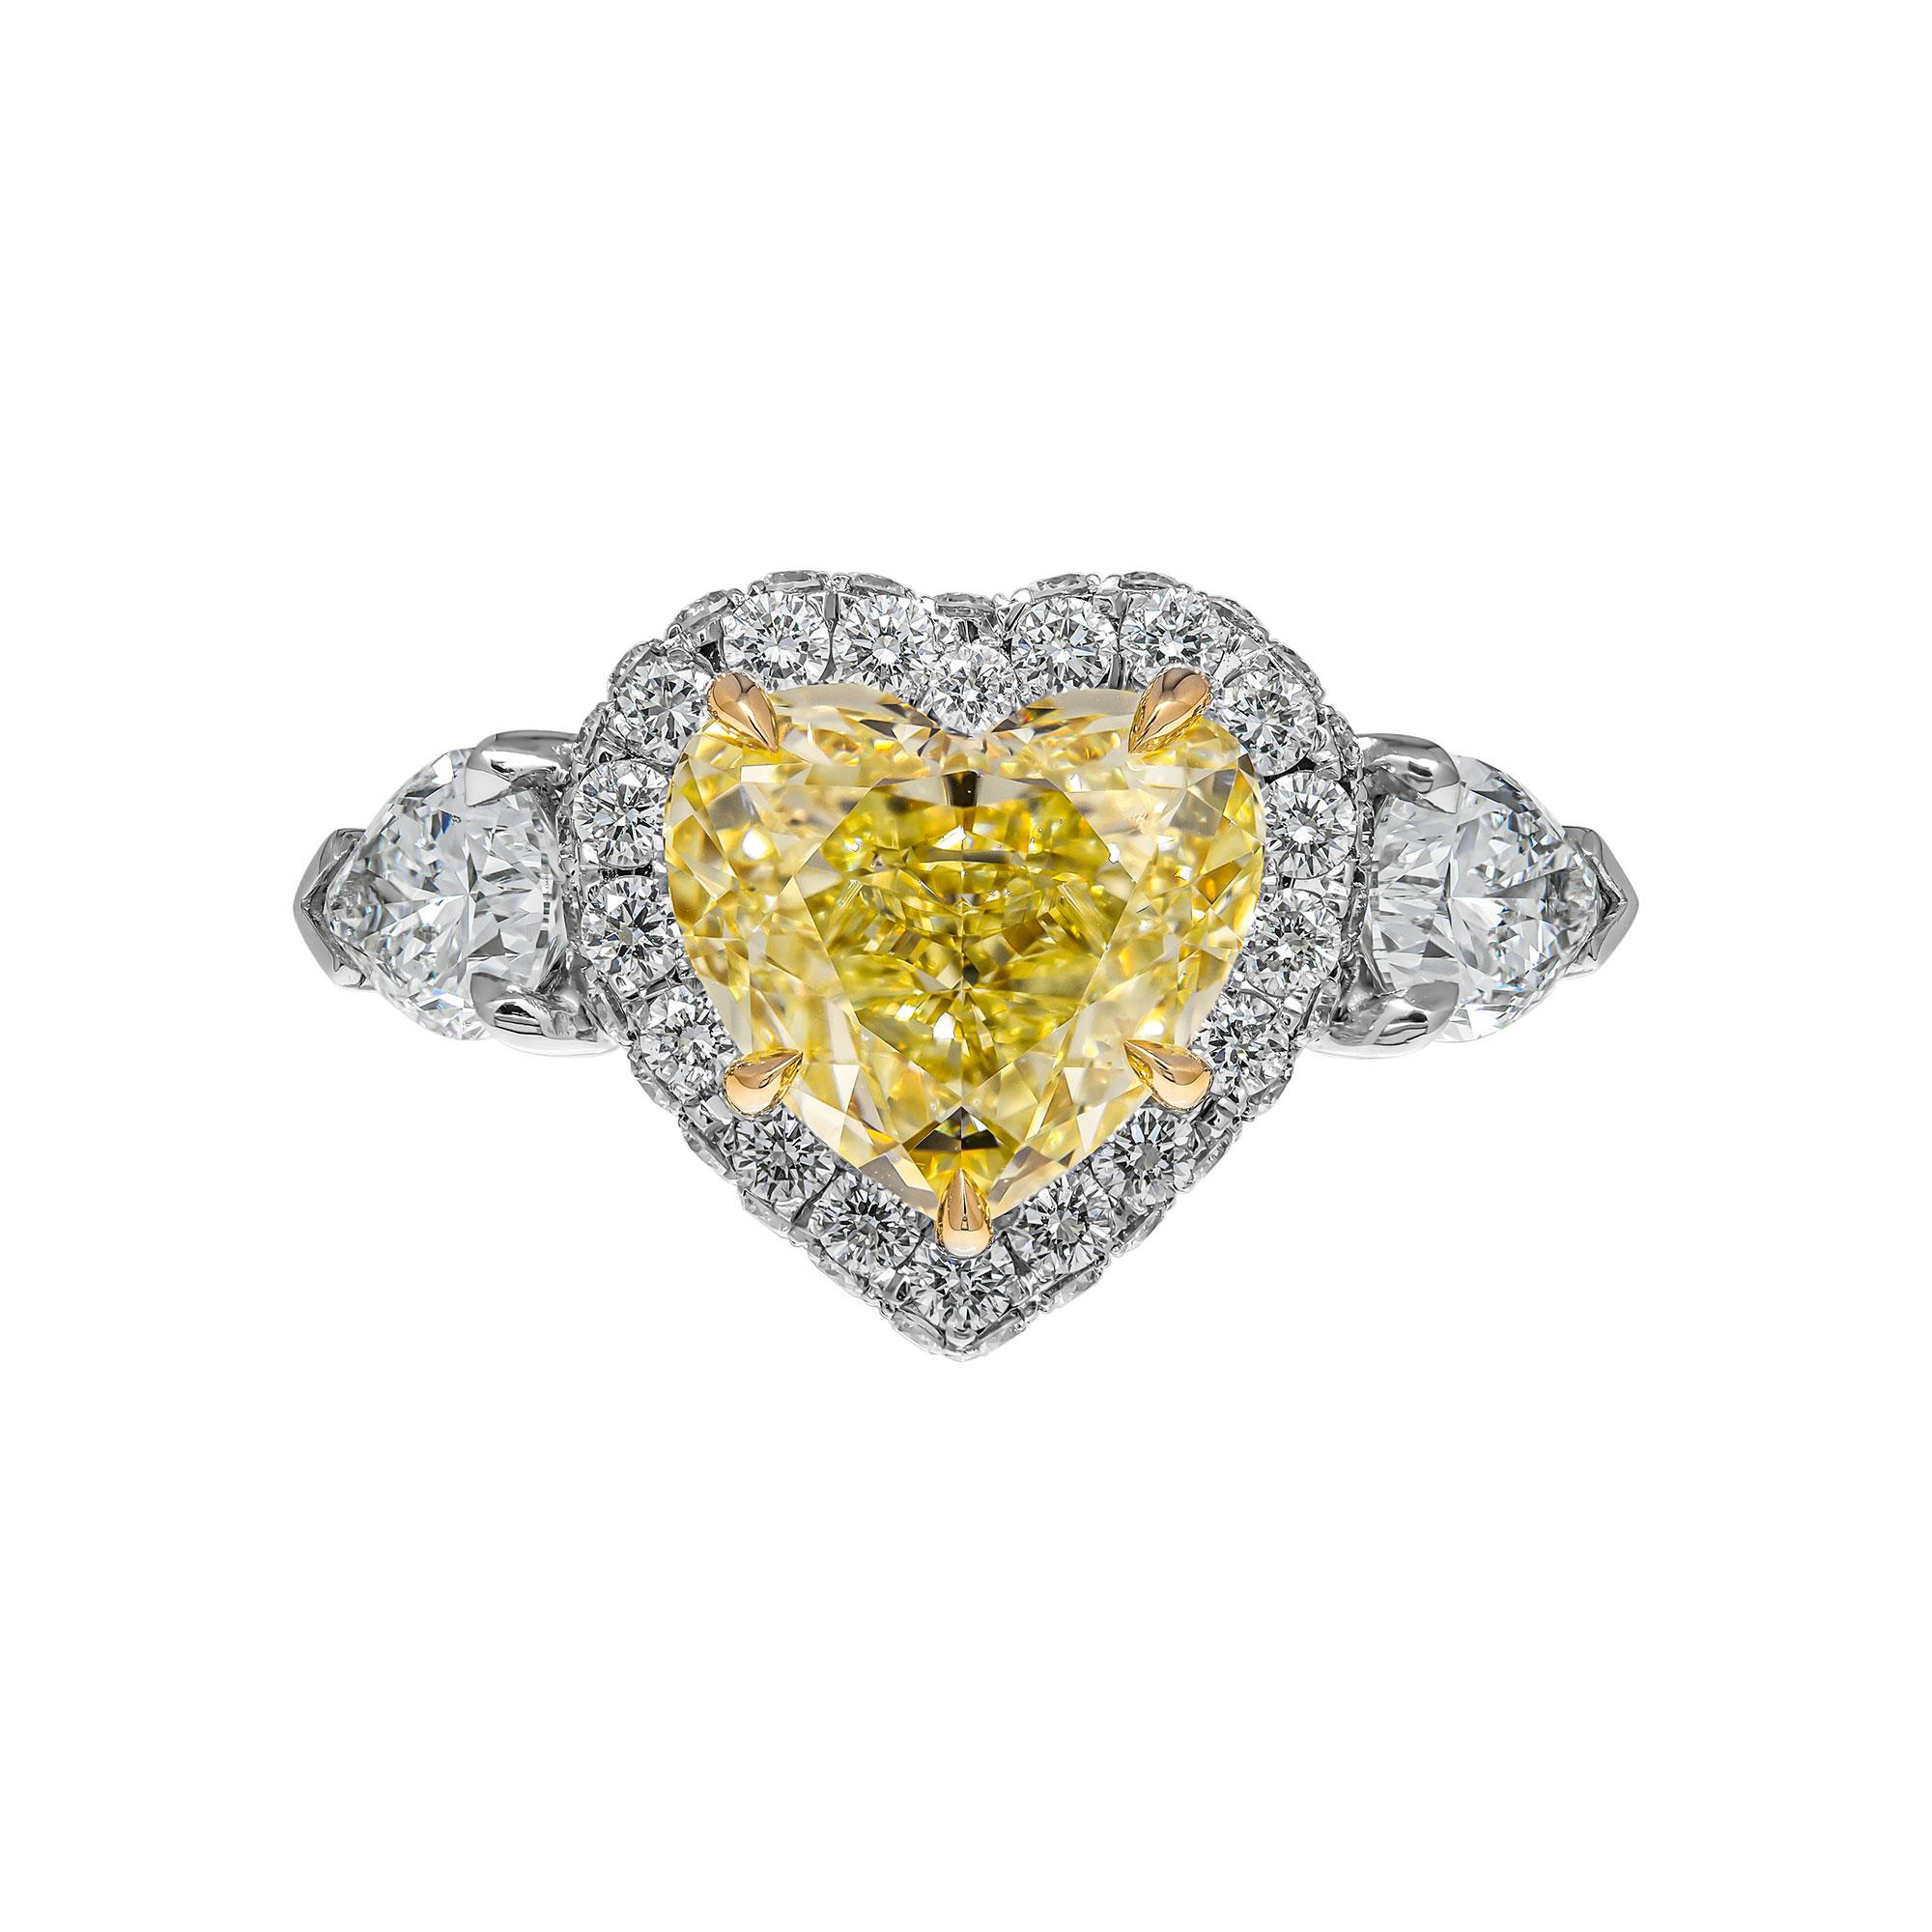 Mounted in handmade custom design setting featuring Platinum 950 & 18K Yellow Gold, diamonds on the shank and on a gallery under each stone and a halo around Center stone, a true piece of art

Setting features exceptional pave work, delicate yet